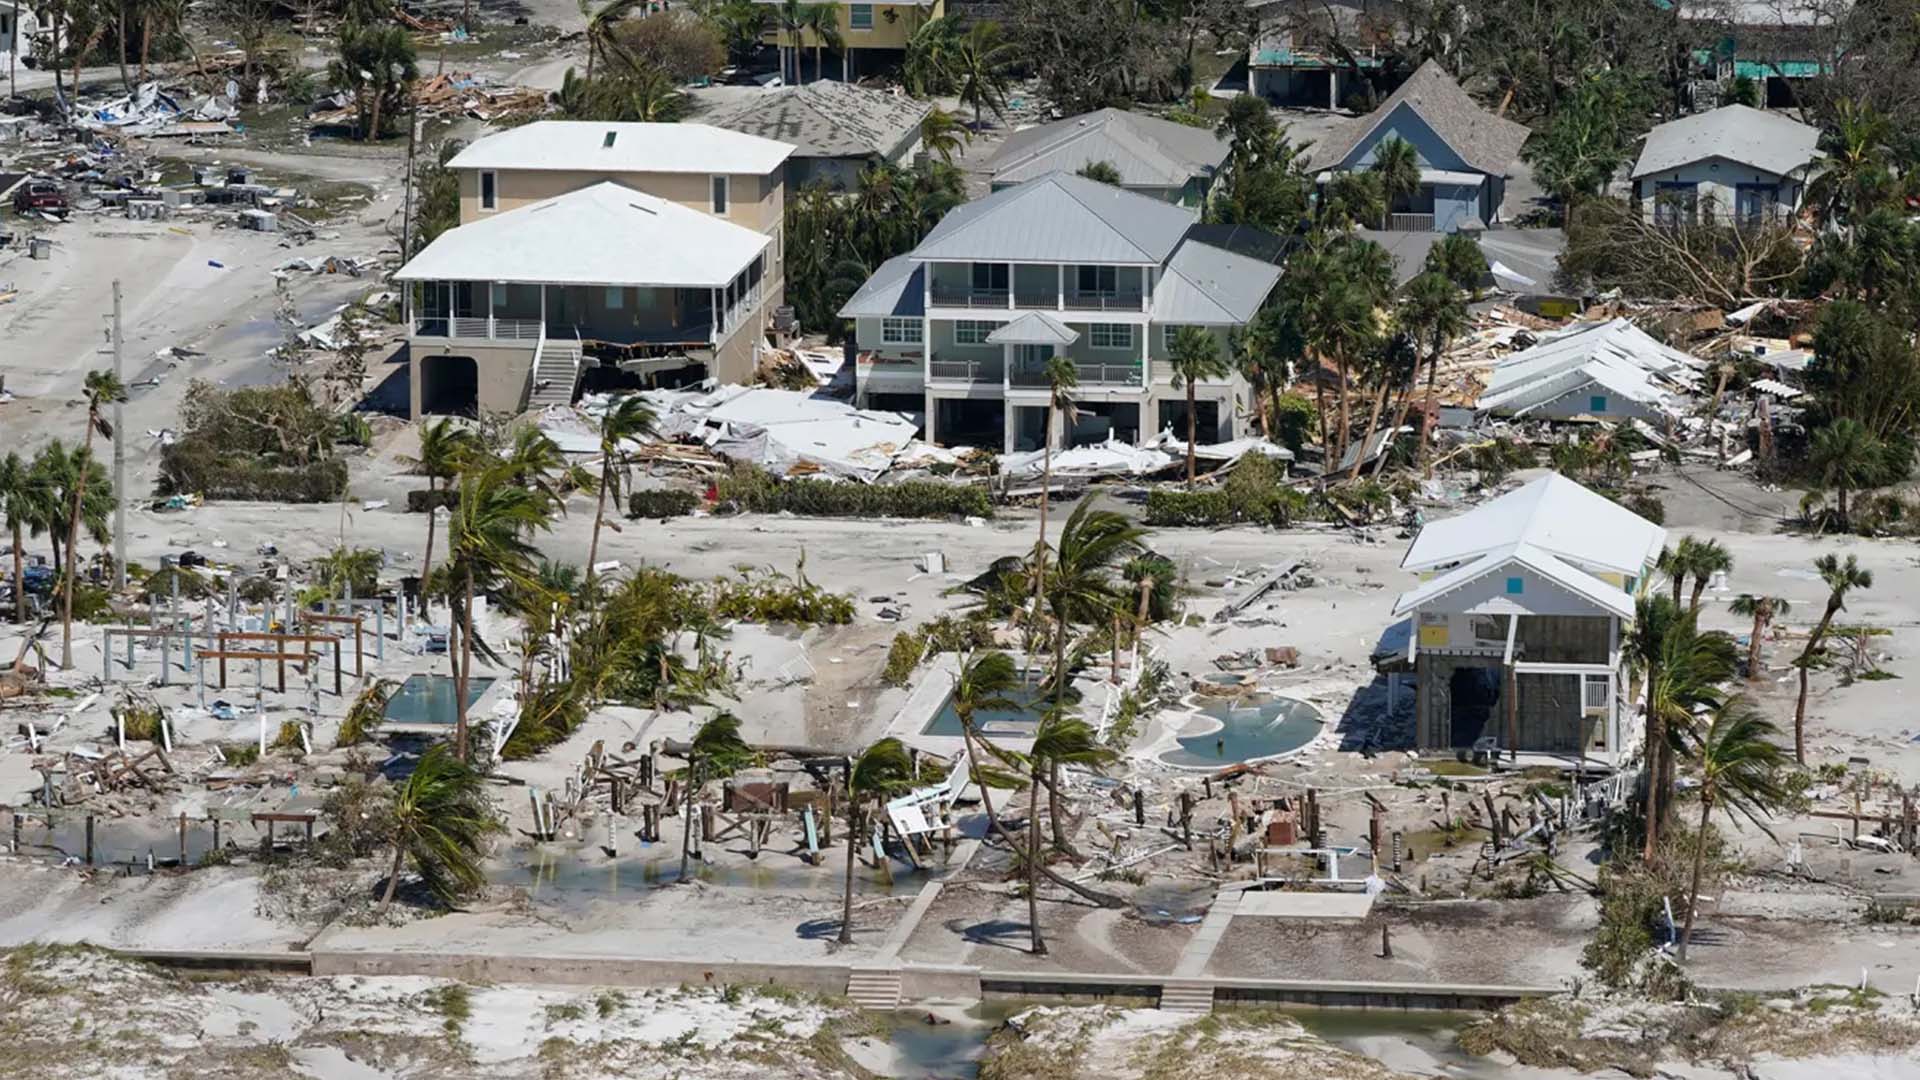 Houses damaged by Hurricane Ian in Florida along the beach